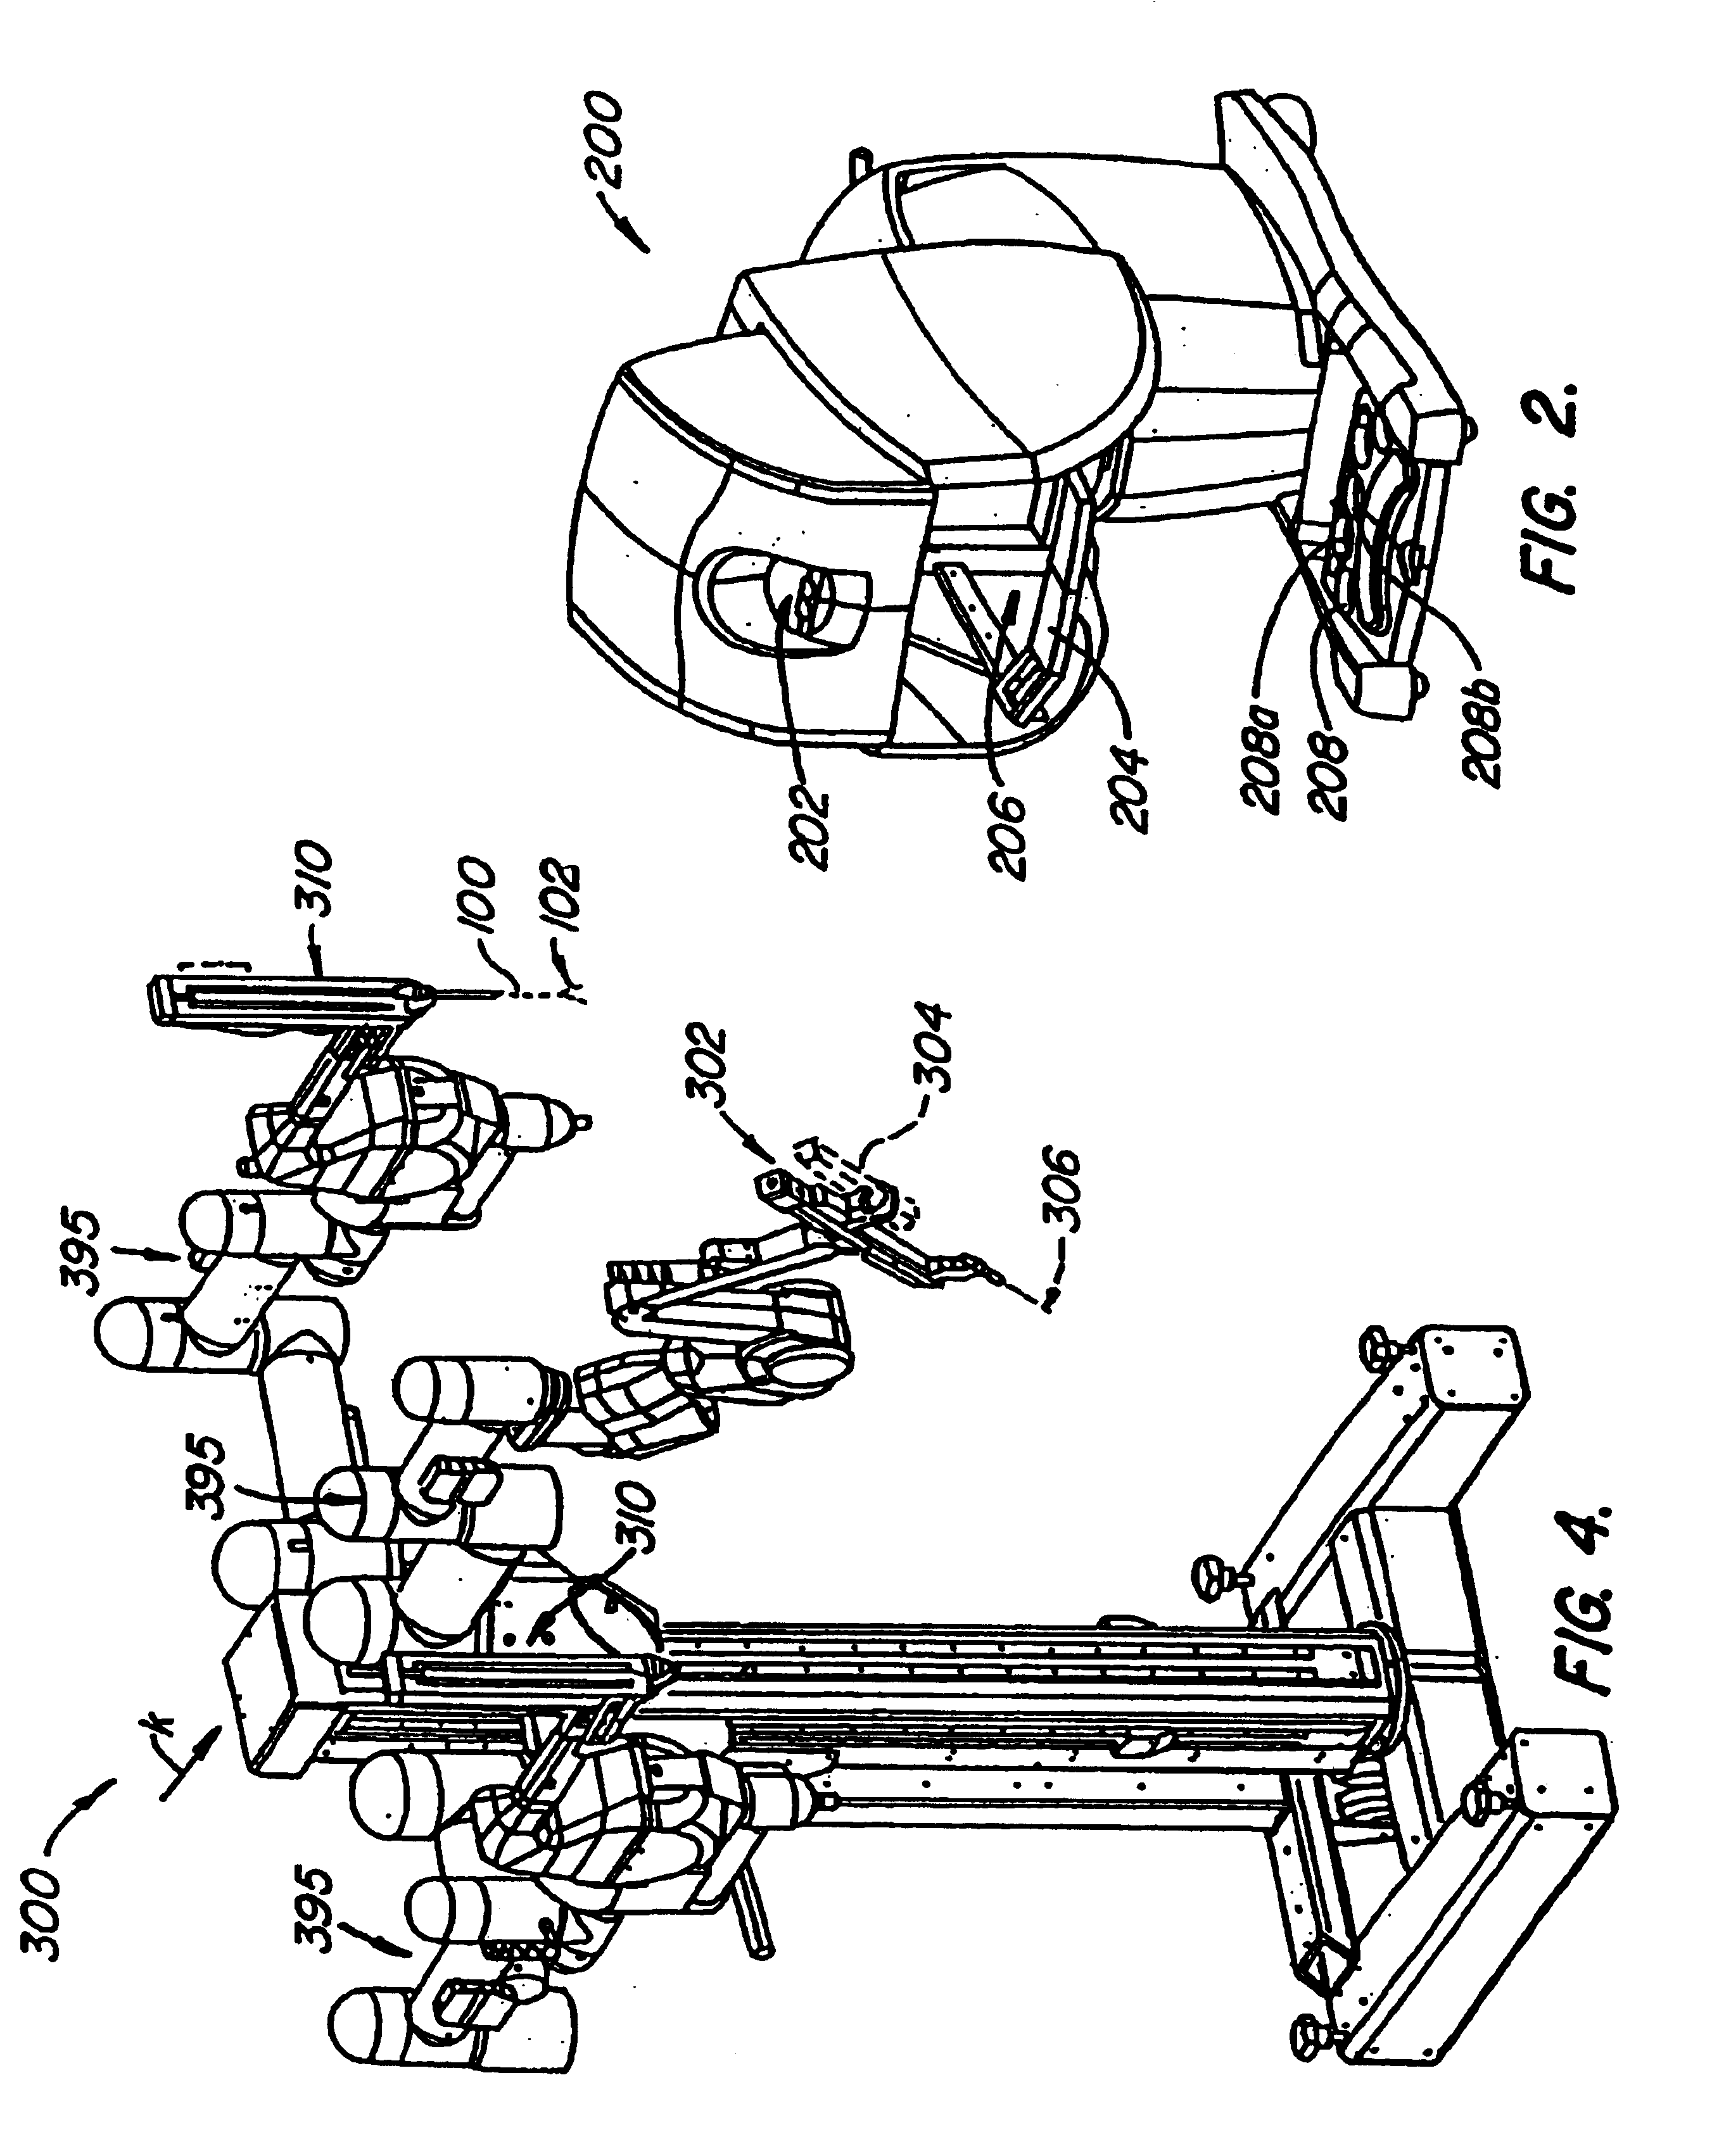 Arm cart for telerobotic surgical system